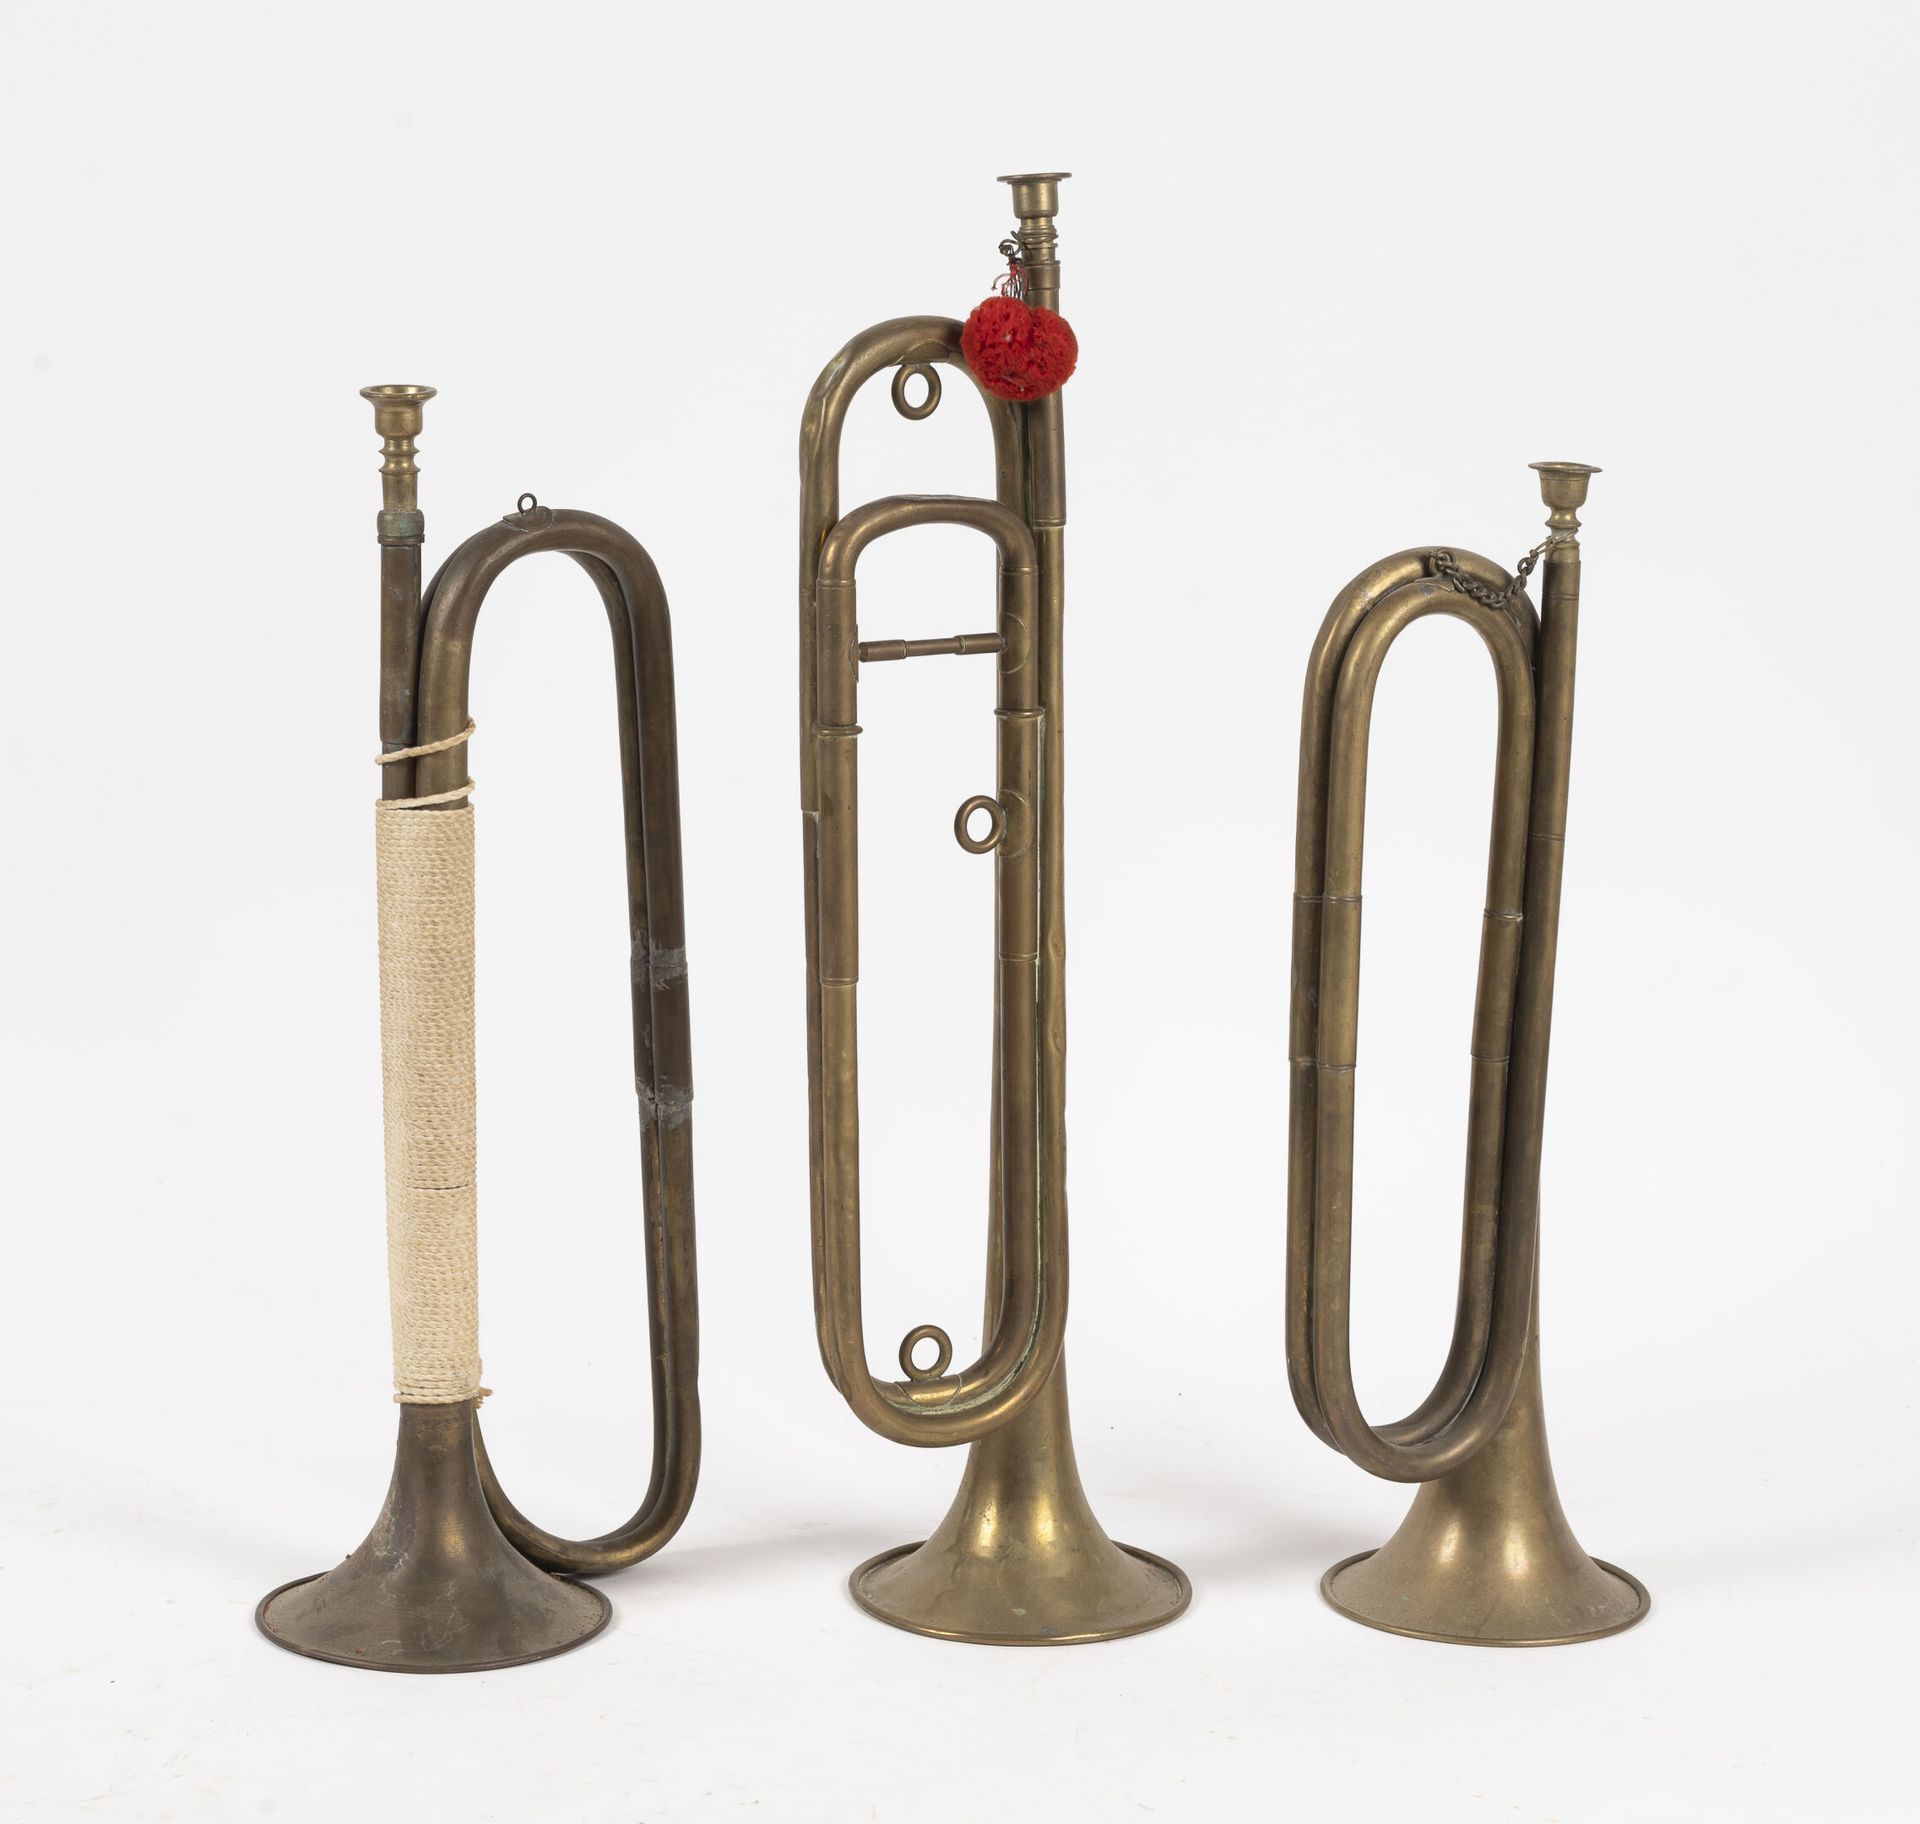 Null Set of 3 copper bugles or trumpets, one of which is a Couesnon brand.

Smal&hellip;